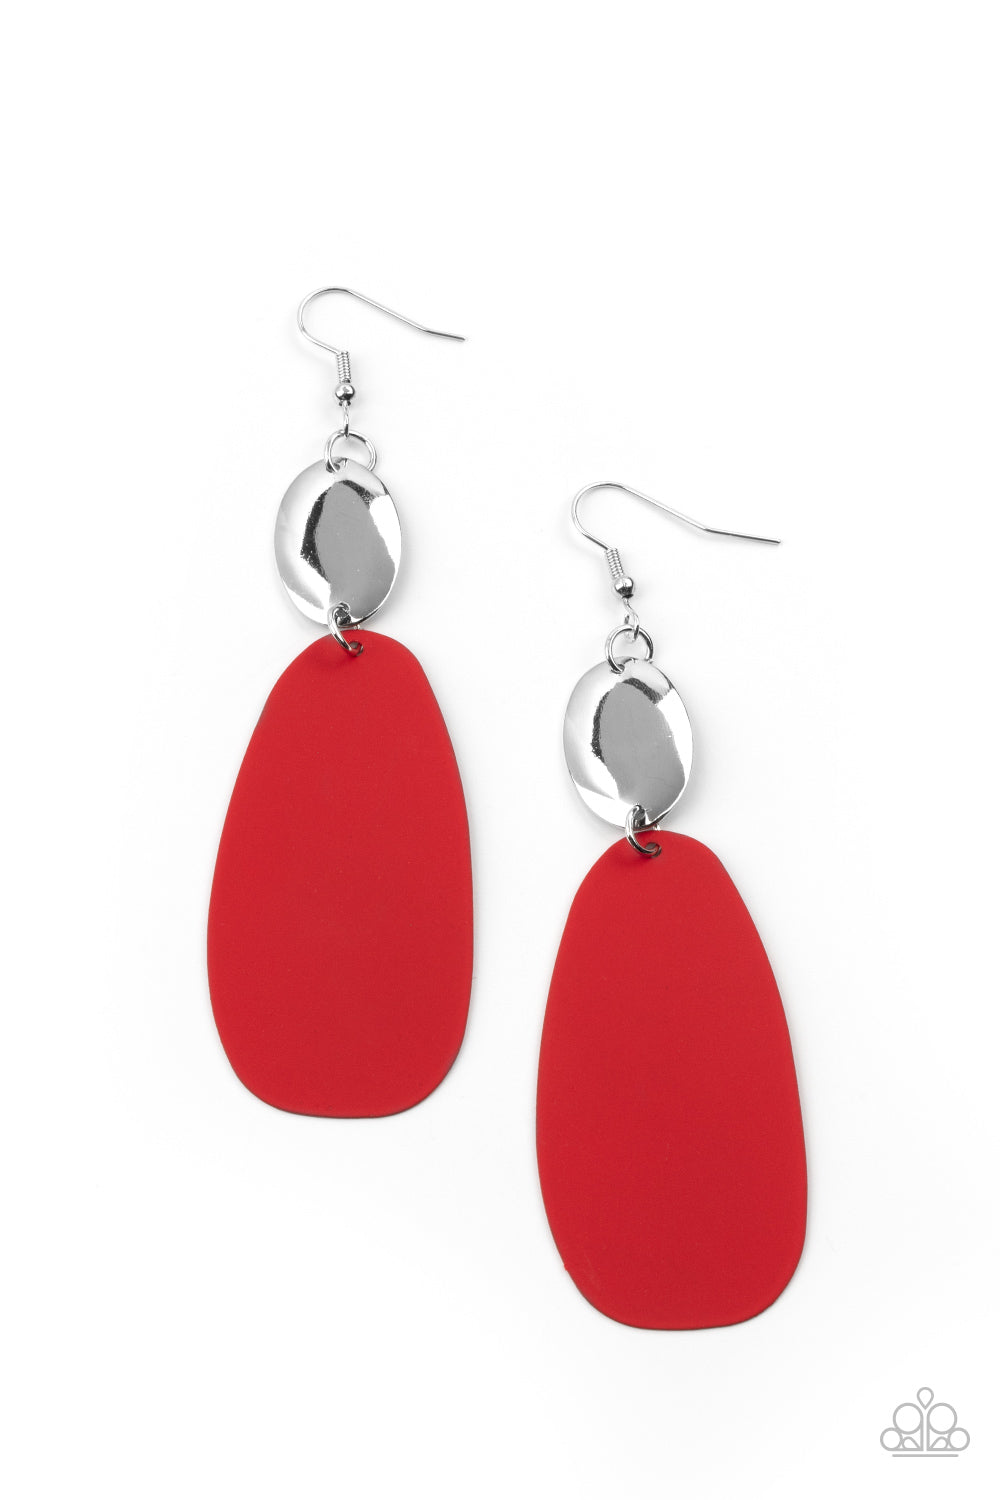 Vivaciously Vogue - Red - Spiffy Chick Jewelry